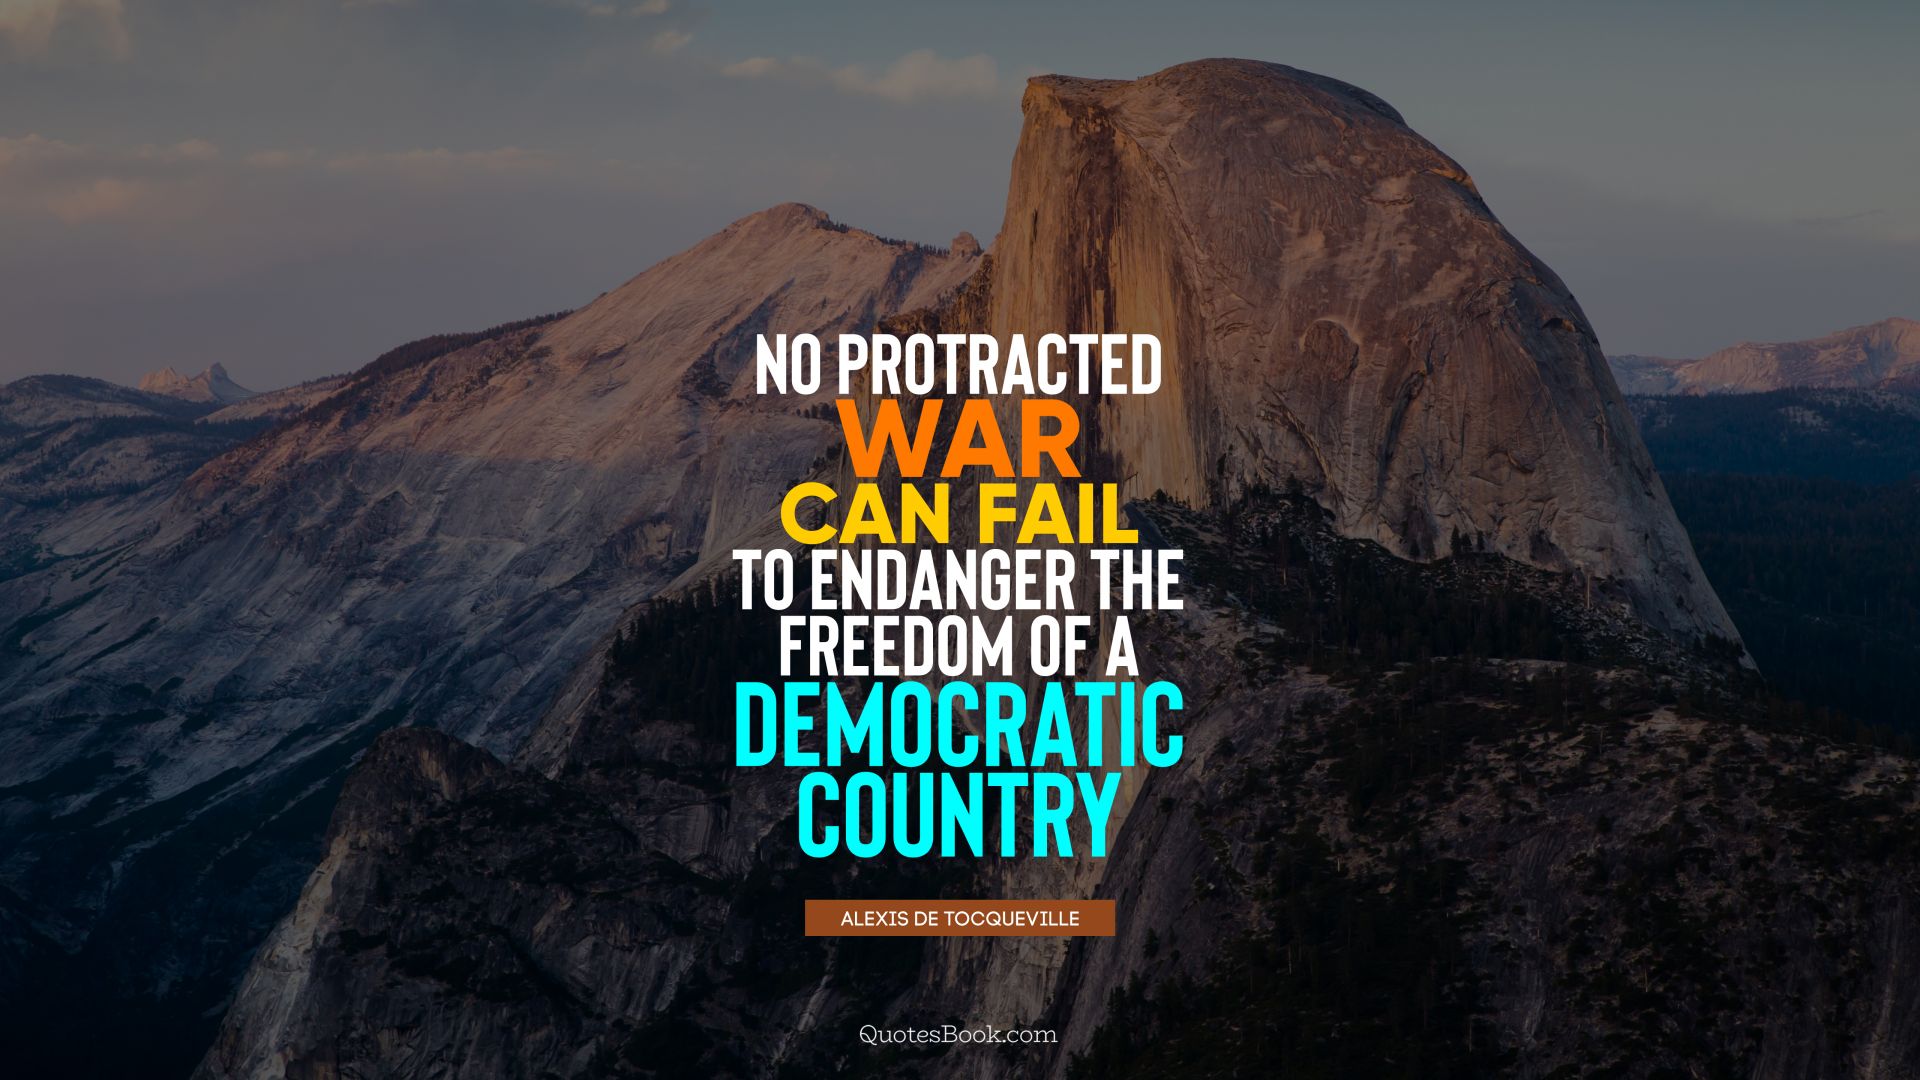 No protracted war can fail to endanger the freedom of a democratic country. - Quote by Alexis de Tocqueville